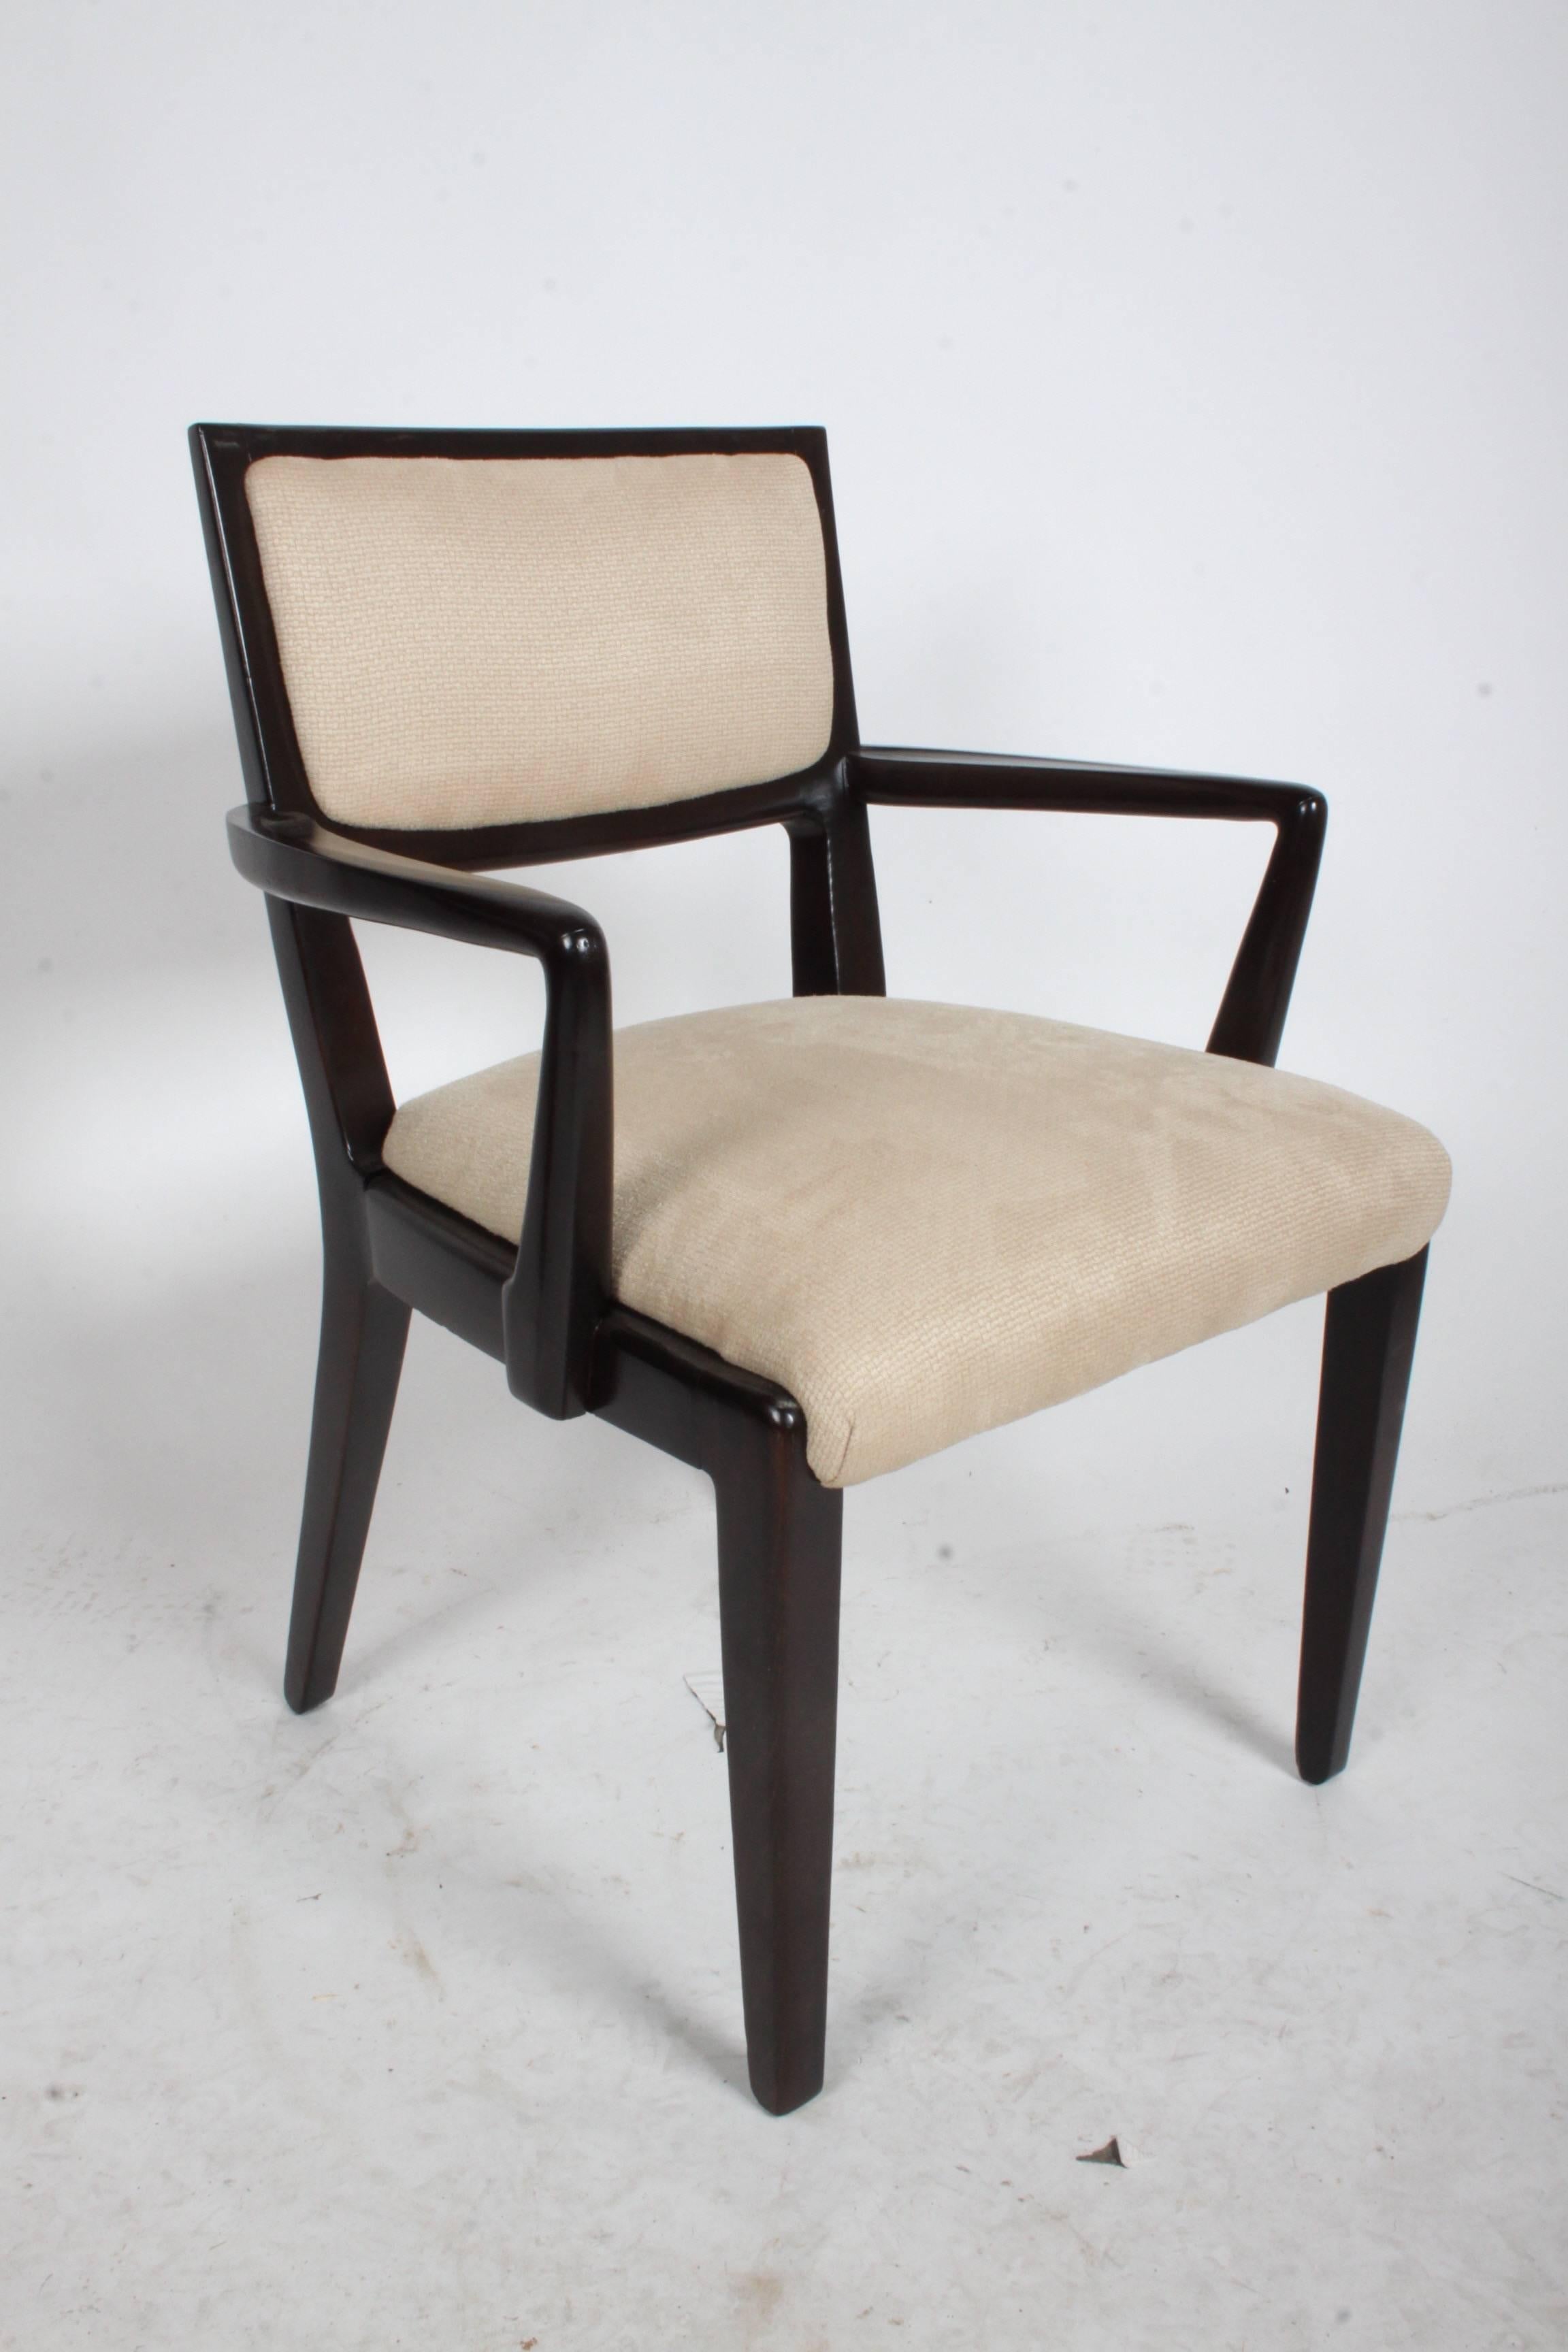 Mid-Century Modern Pair of Edward Wormley for Drexel Arm Chairs - Precedent Collection  For Sale